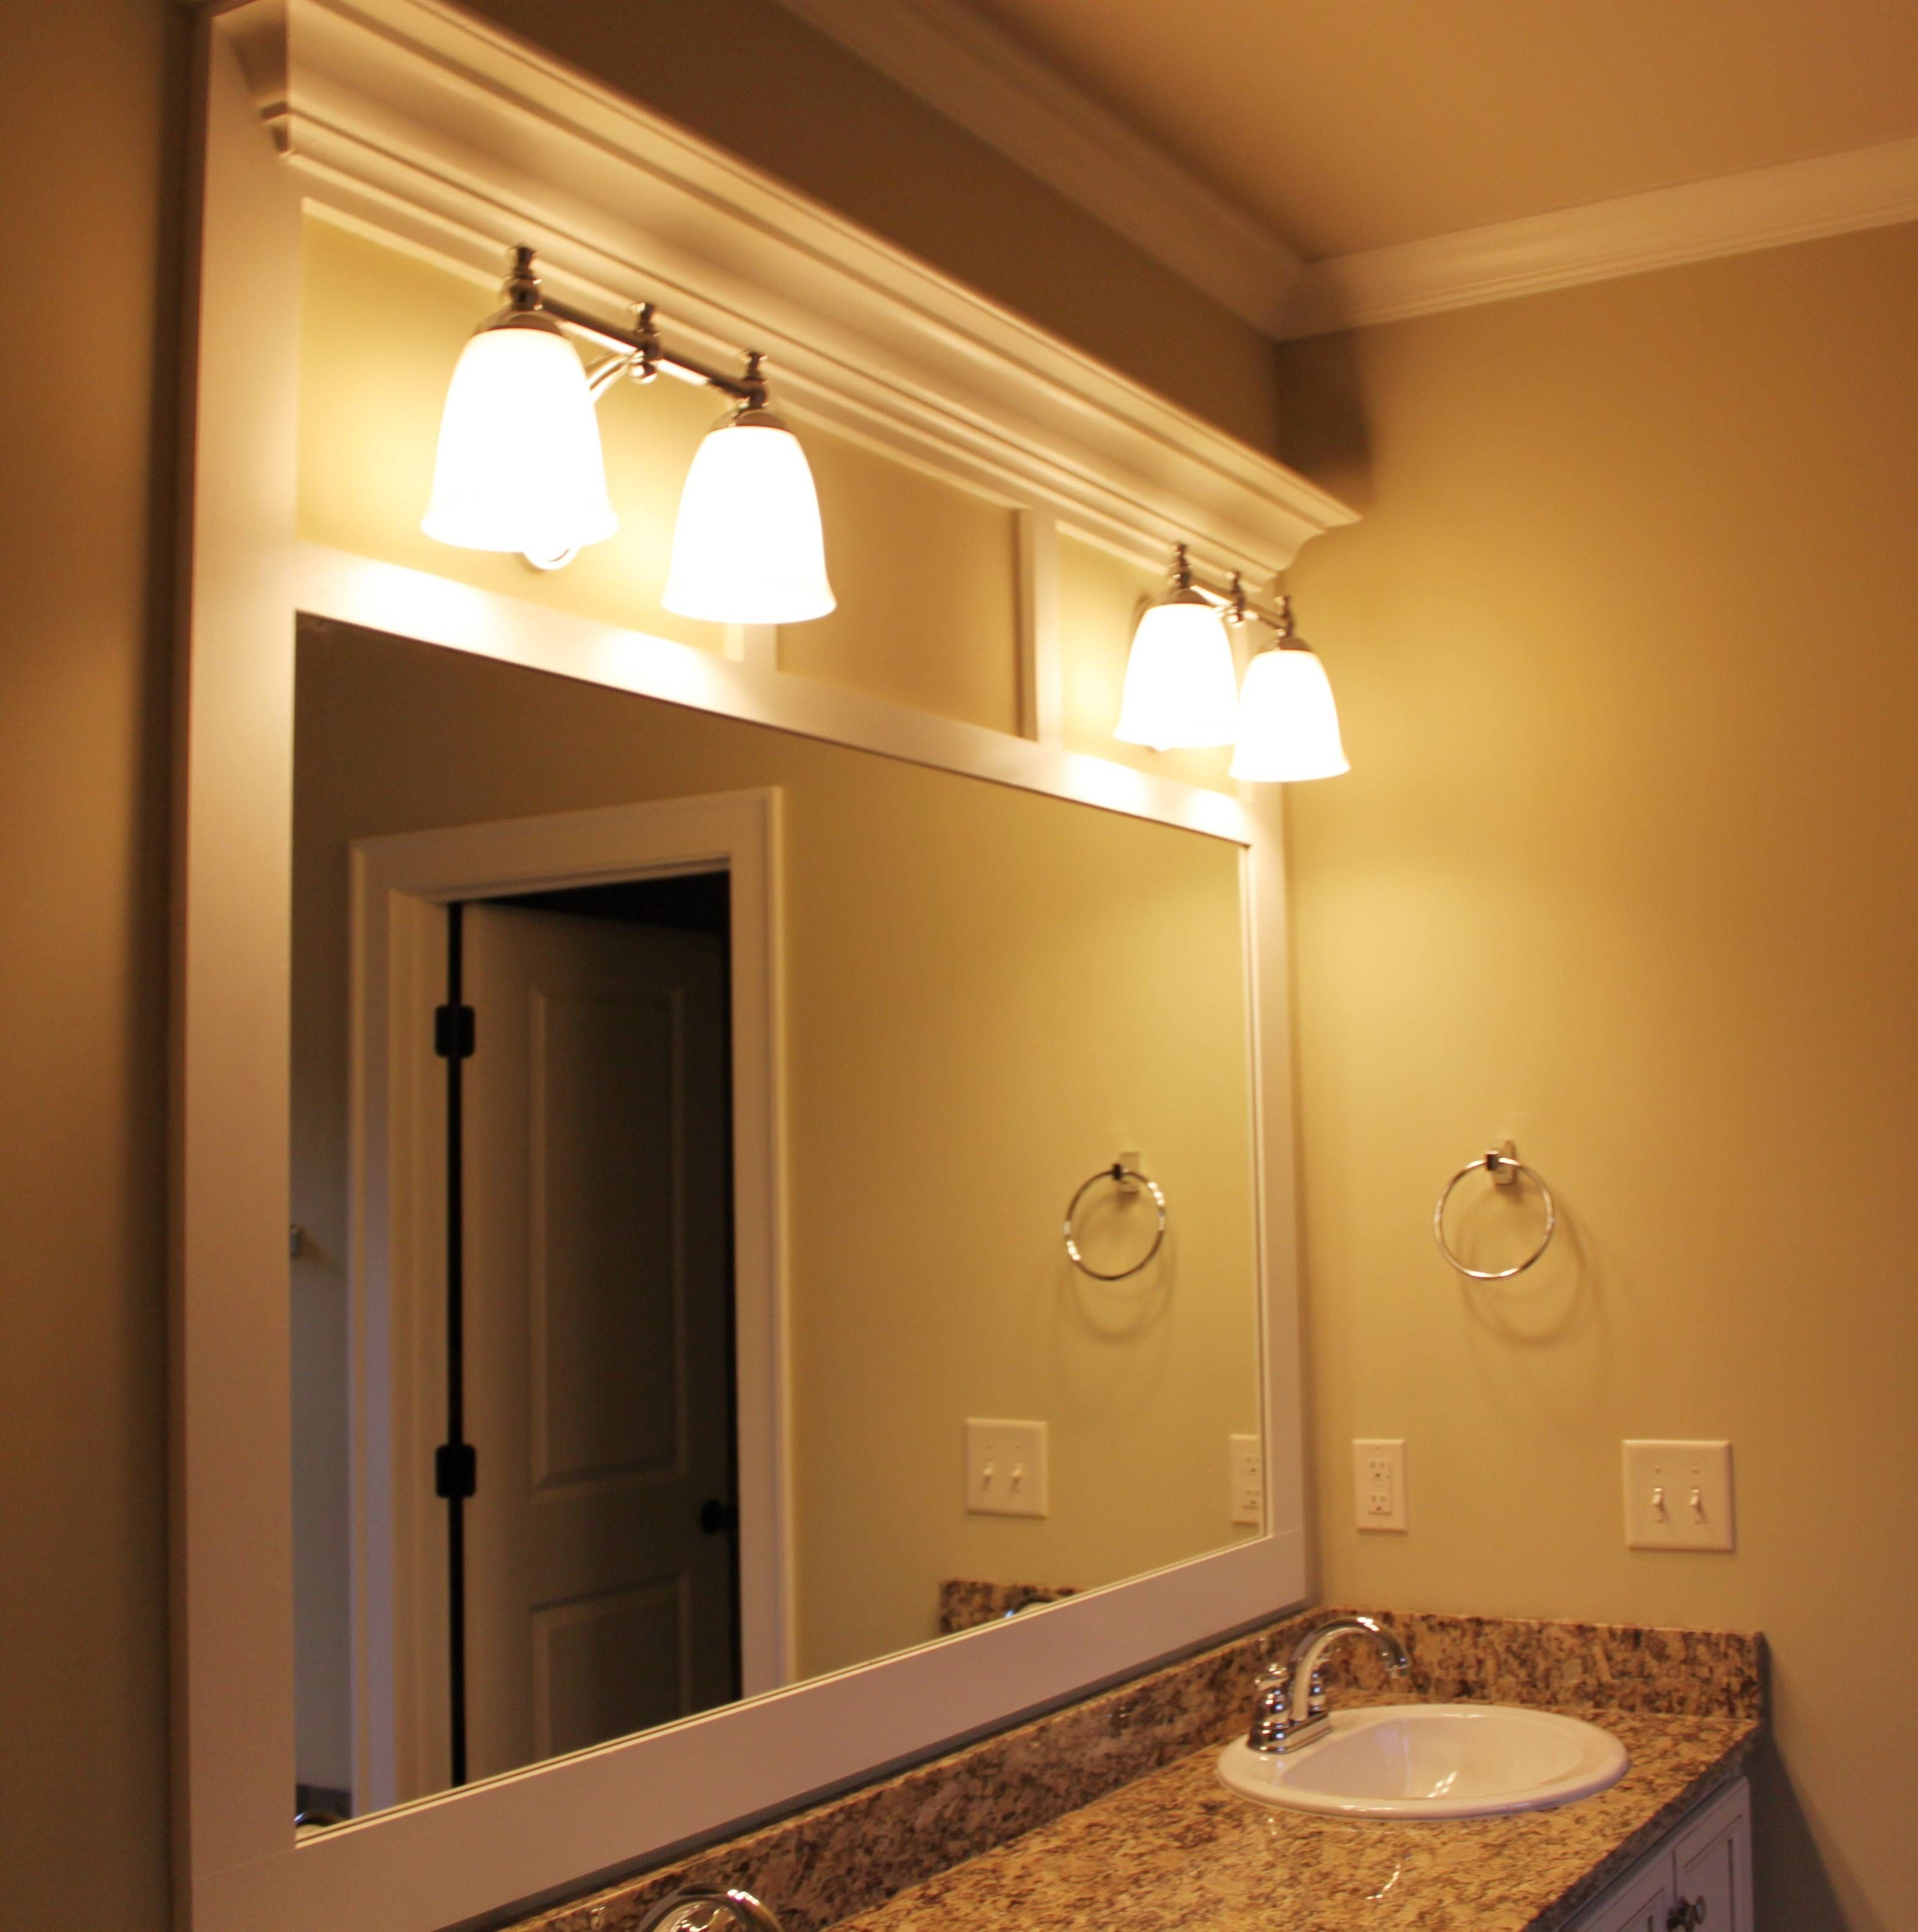 Custom Size Mirrors Bathrooms 85 Outstanding For Large Framed Intended For Large Landscape Mirrors (View 13 of 25)